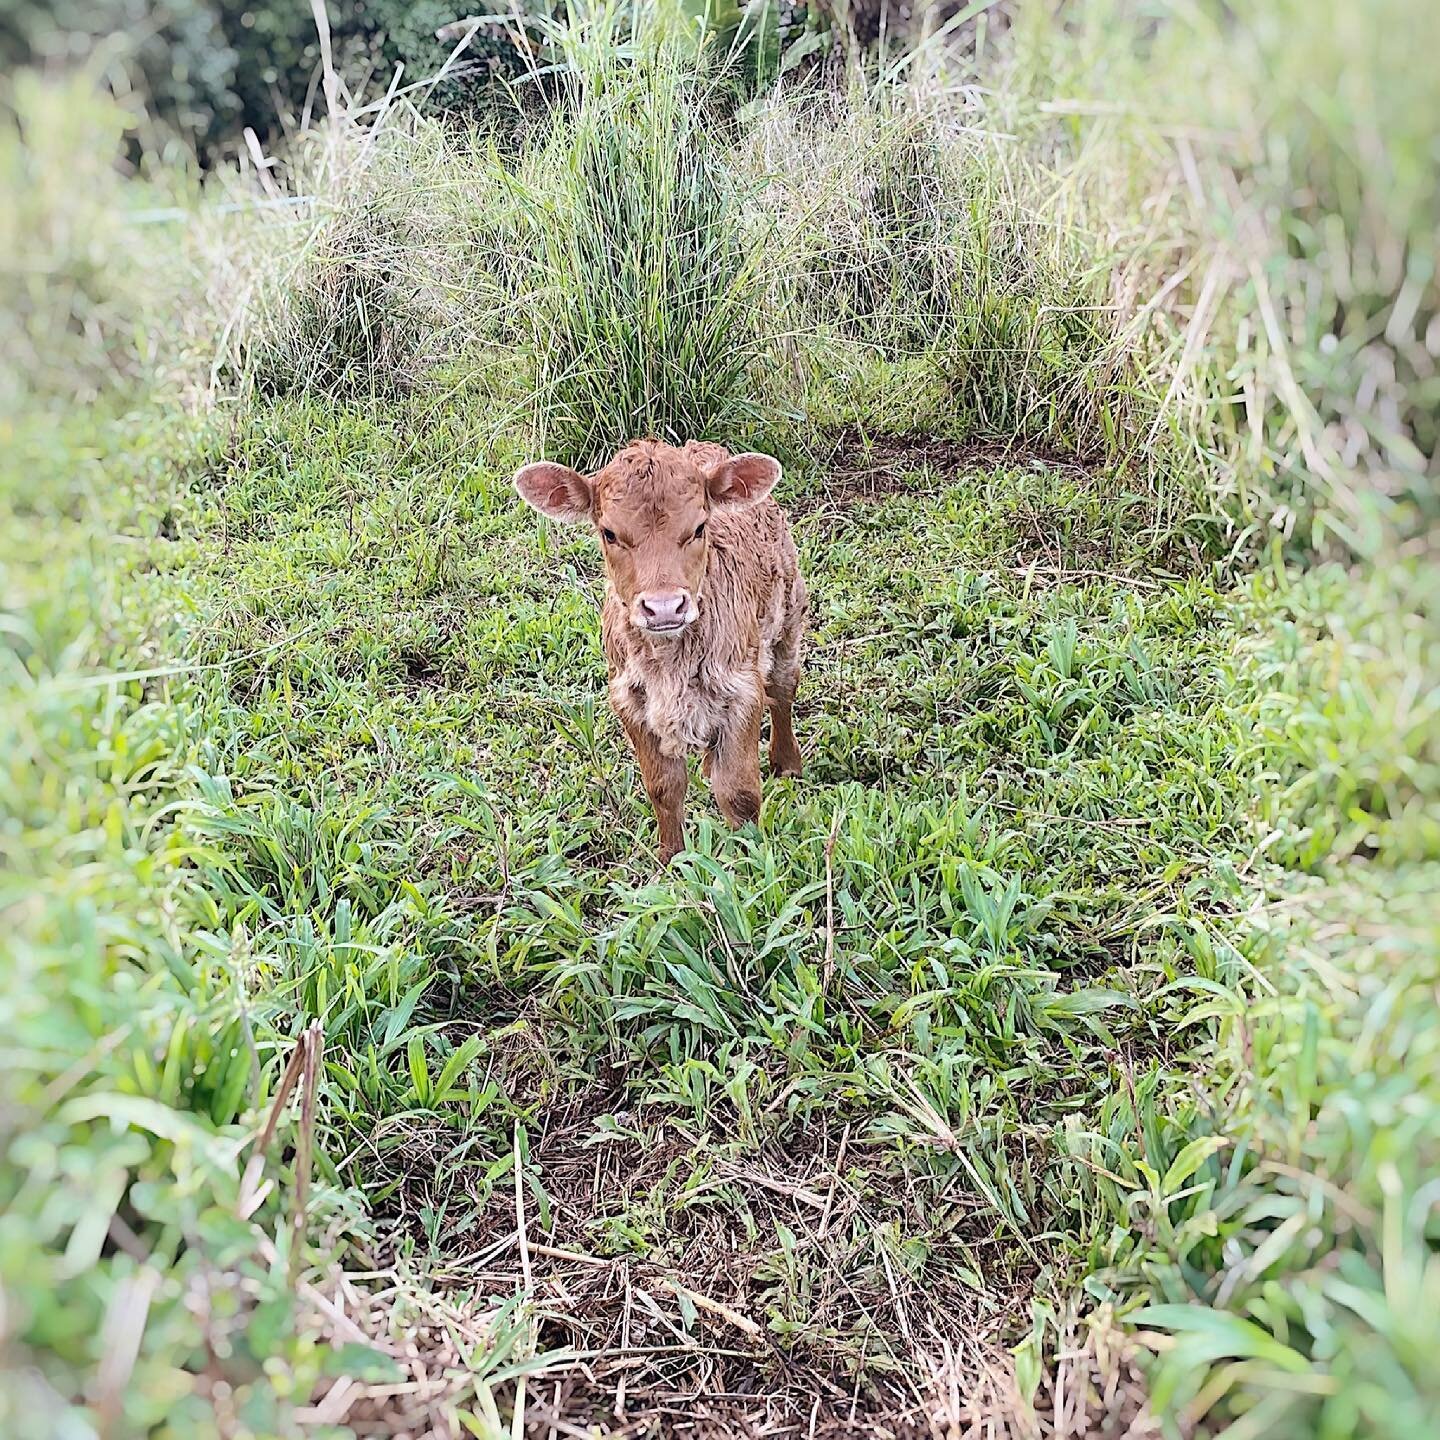 Sugar and spice and everything NAUGHTY!

That&rsquo;s what little Fawn is made of.

This little calf is causing quite the dust up with the chickens.

You see, Fawn enjoys chasing chickens. She runs at them, behind them, and looks puzzled when they do